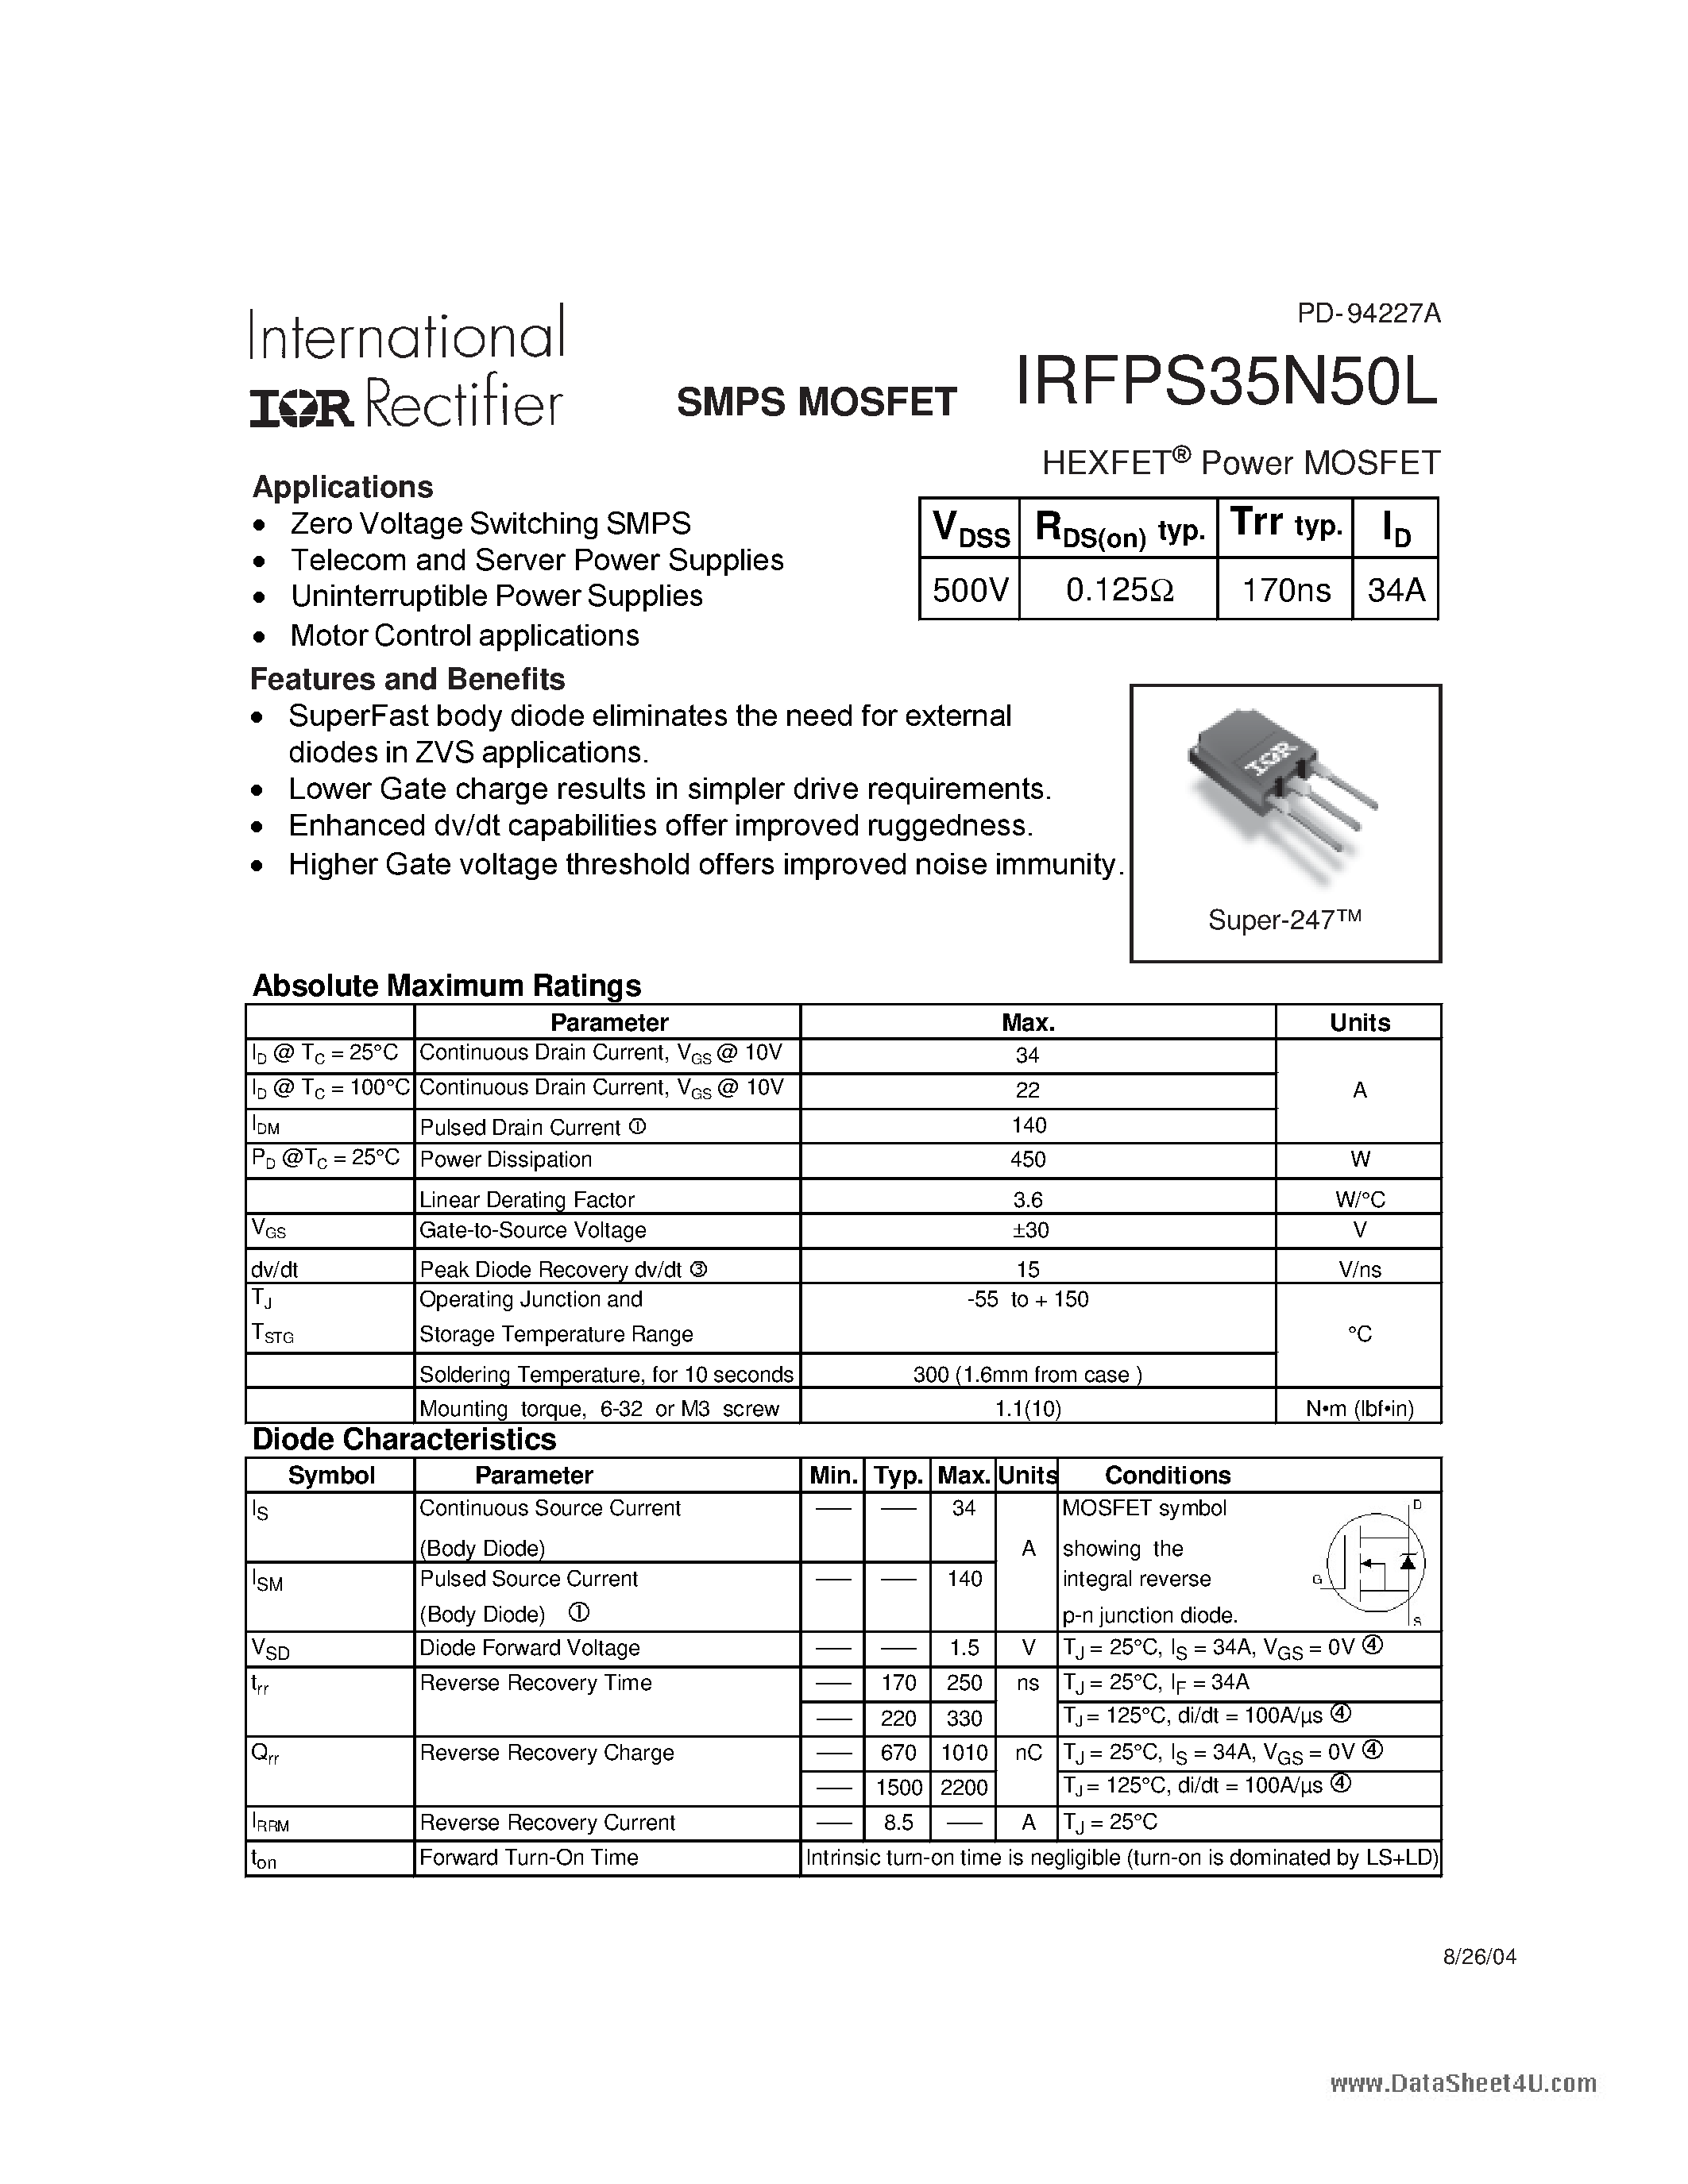 Datasheet IRFPS35N50L - HEXFET Power MOSFET page 1